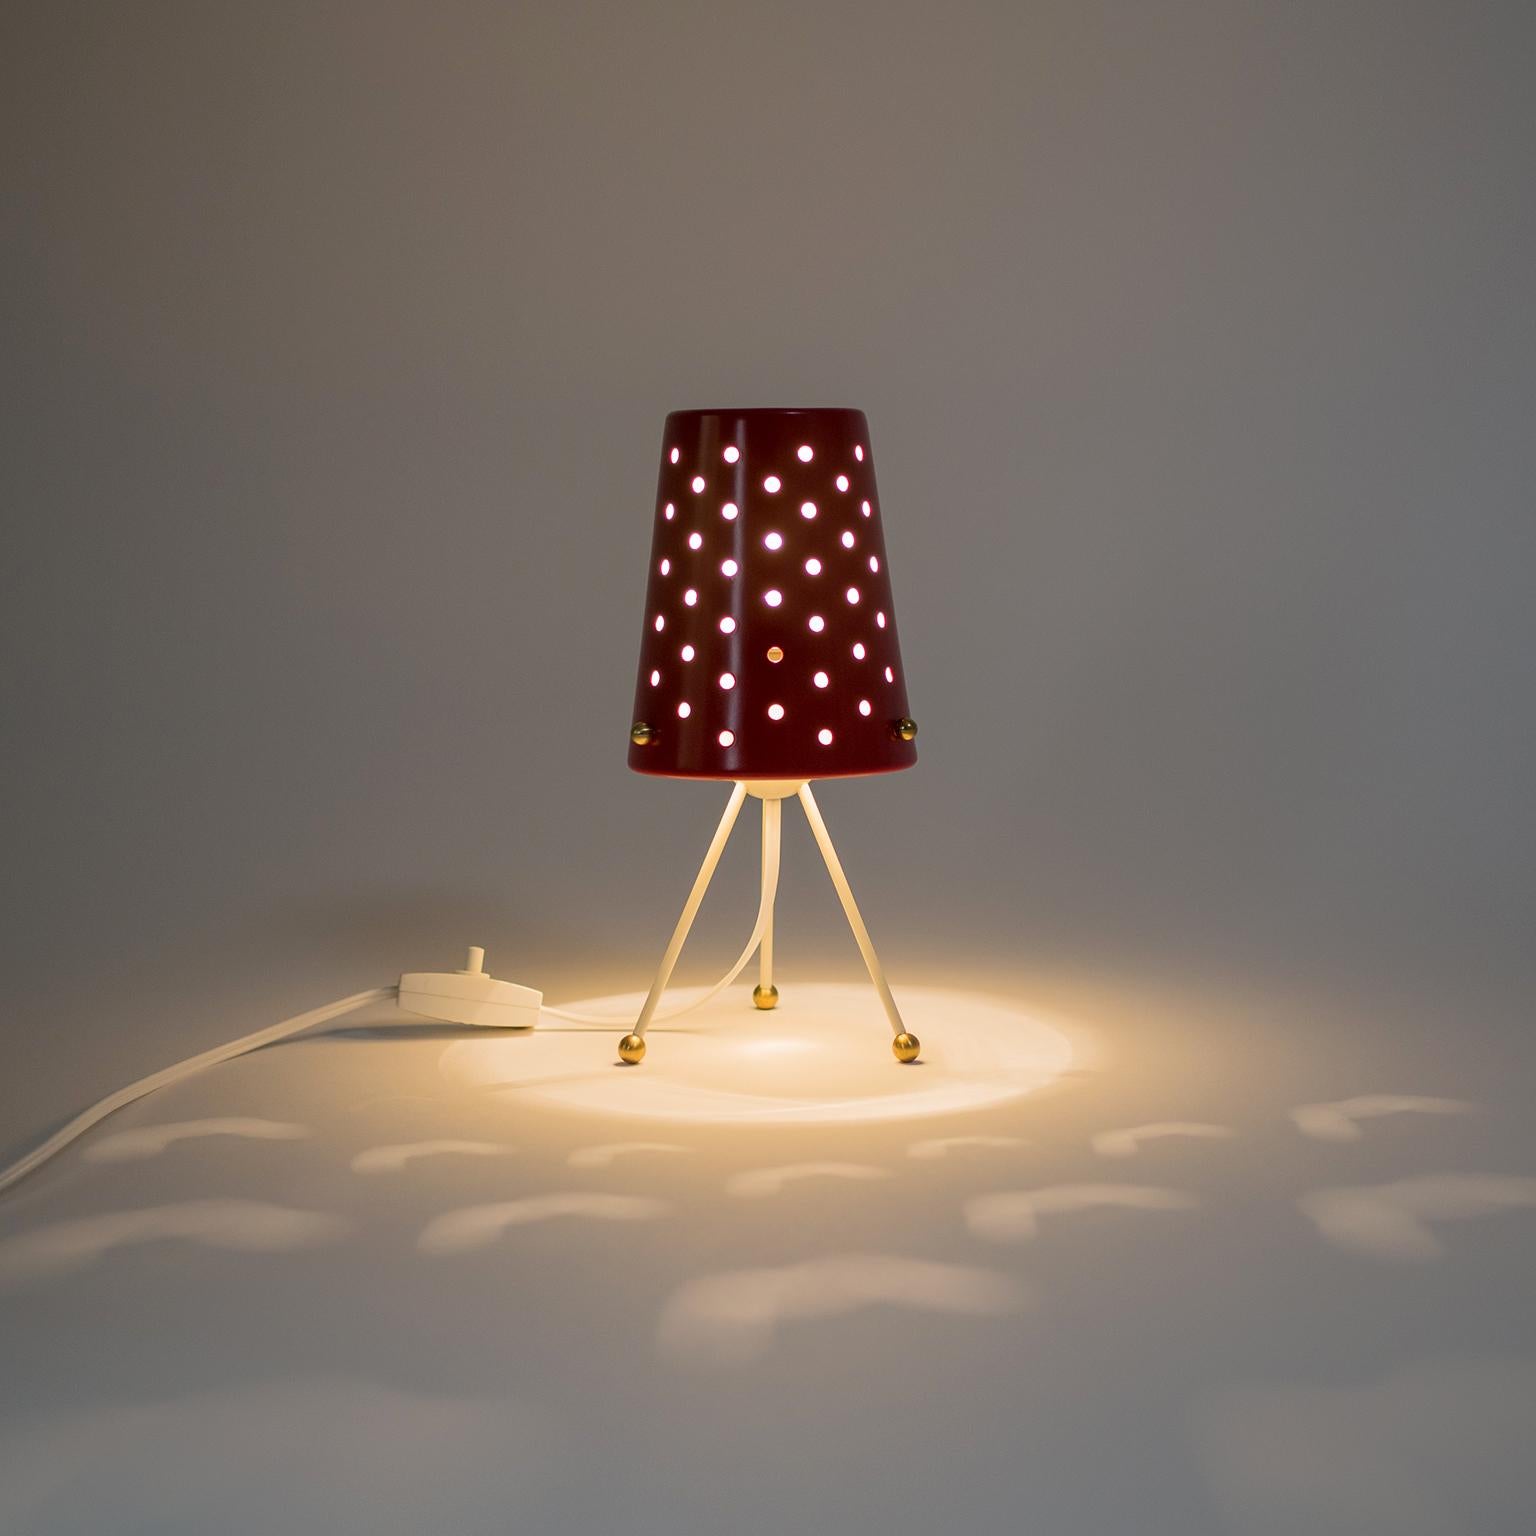 Aluminum Table Lamp with Pierced Red Shade and Brass Details, 1950s